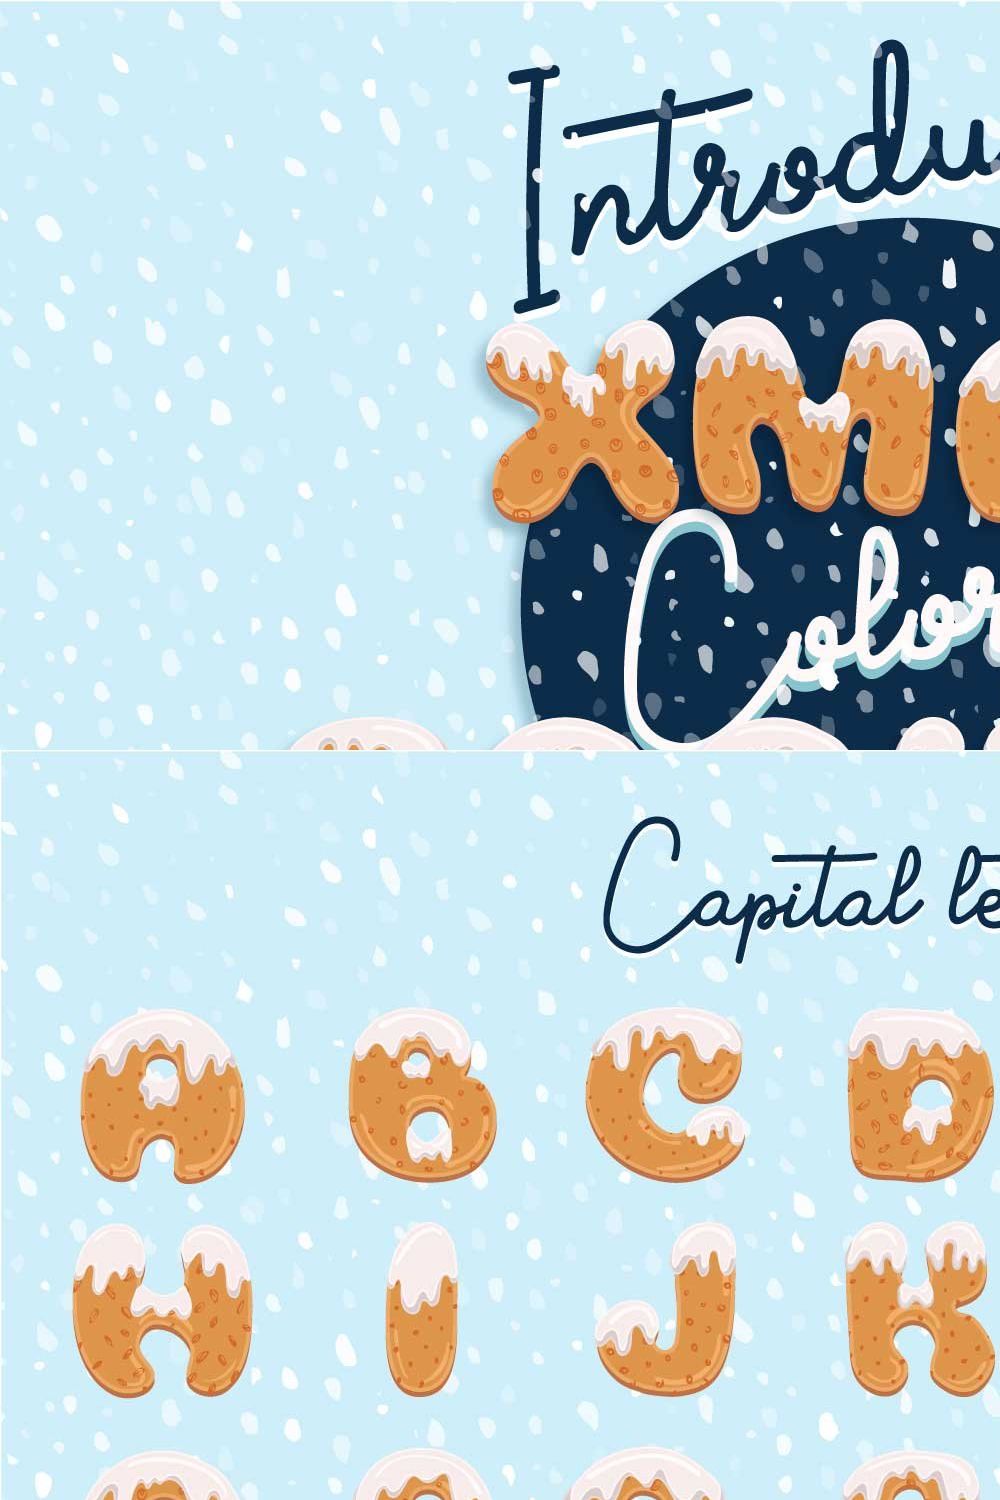 Xmas cookie font family pinterest preview image.